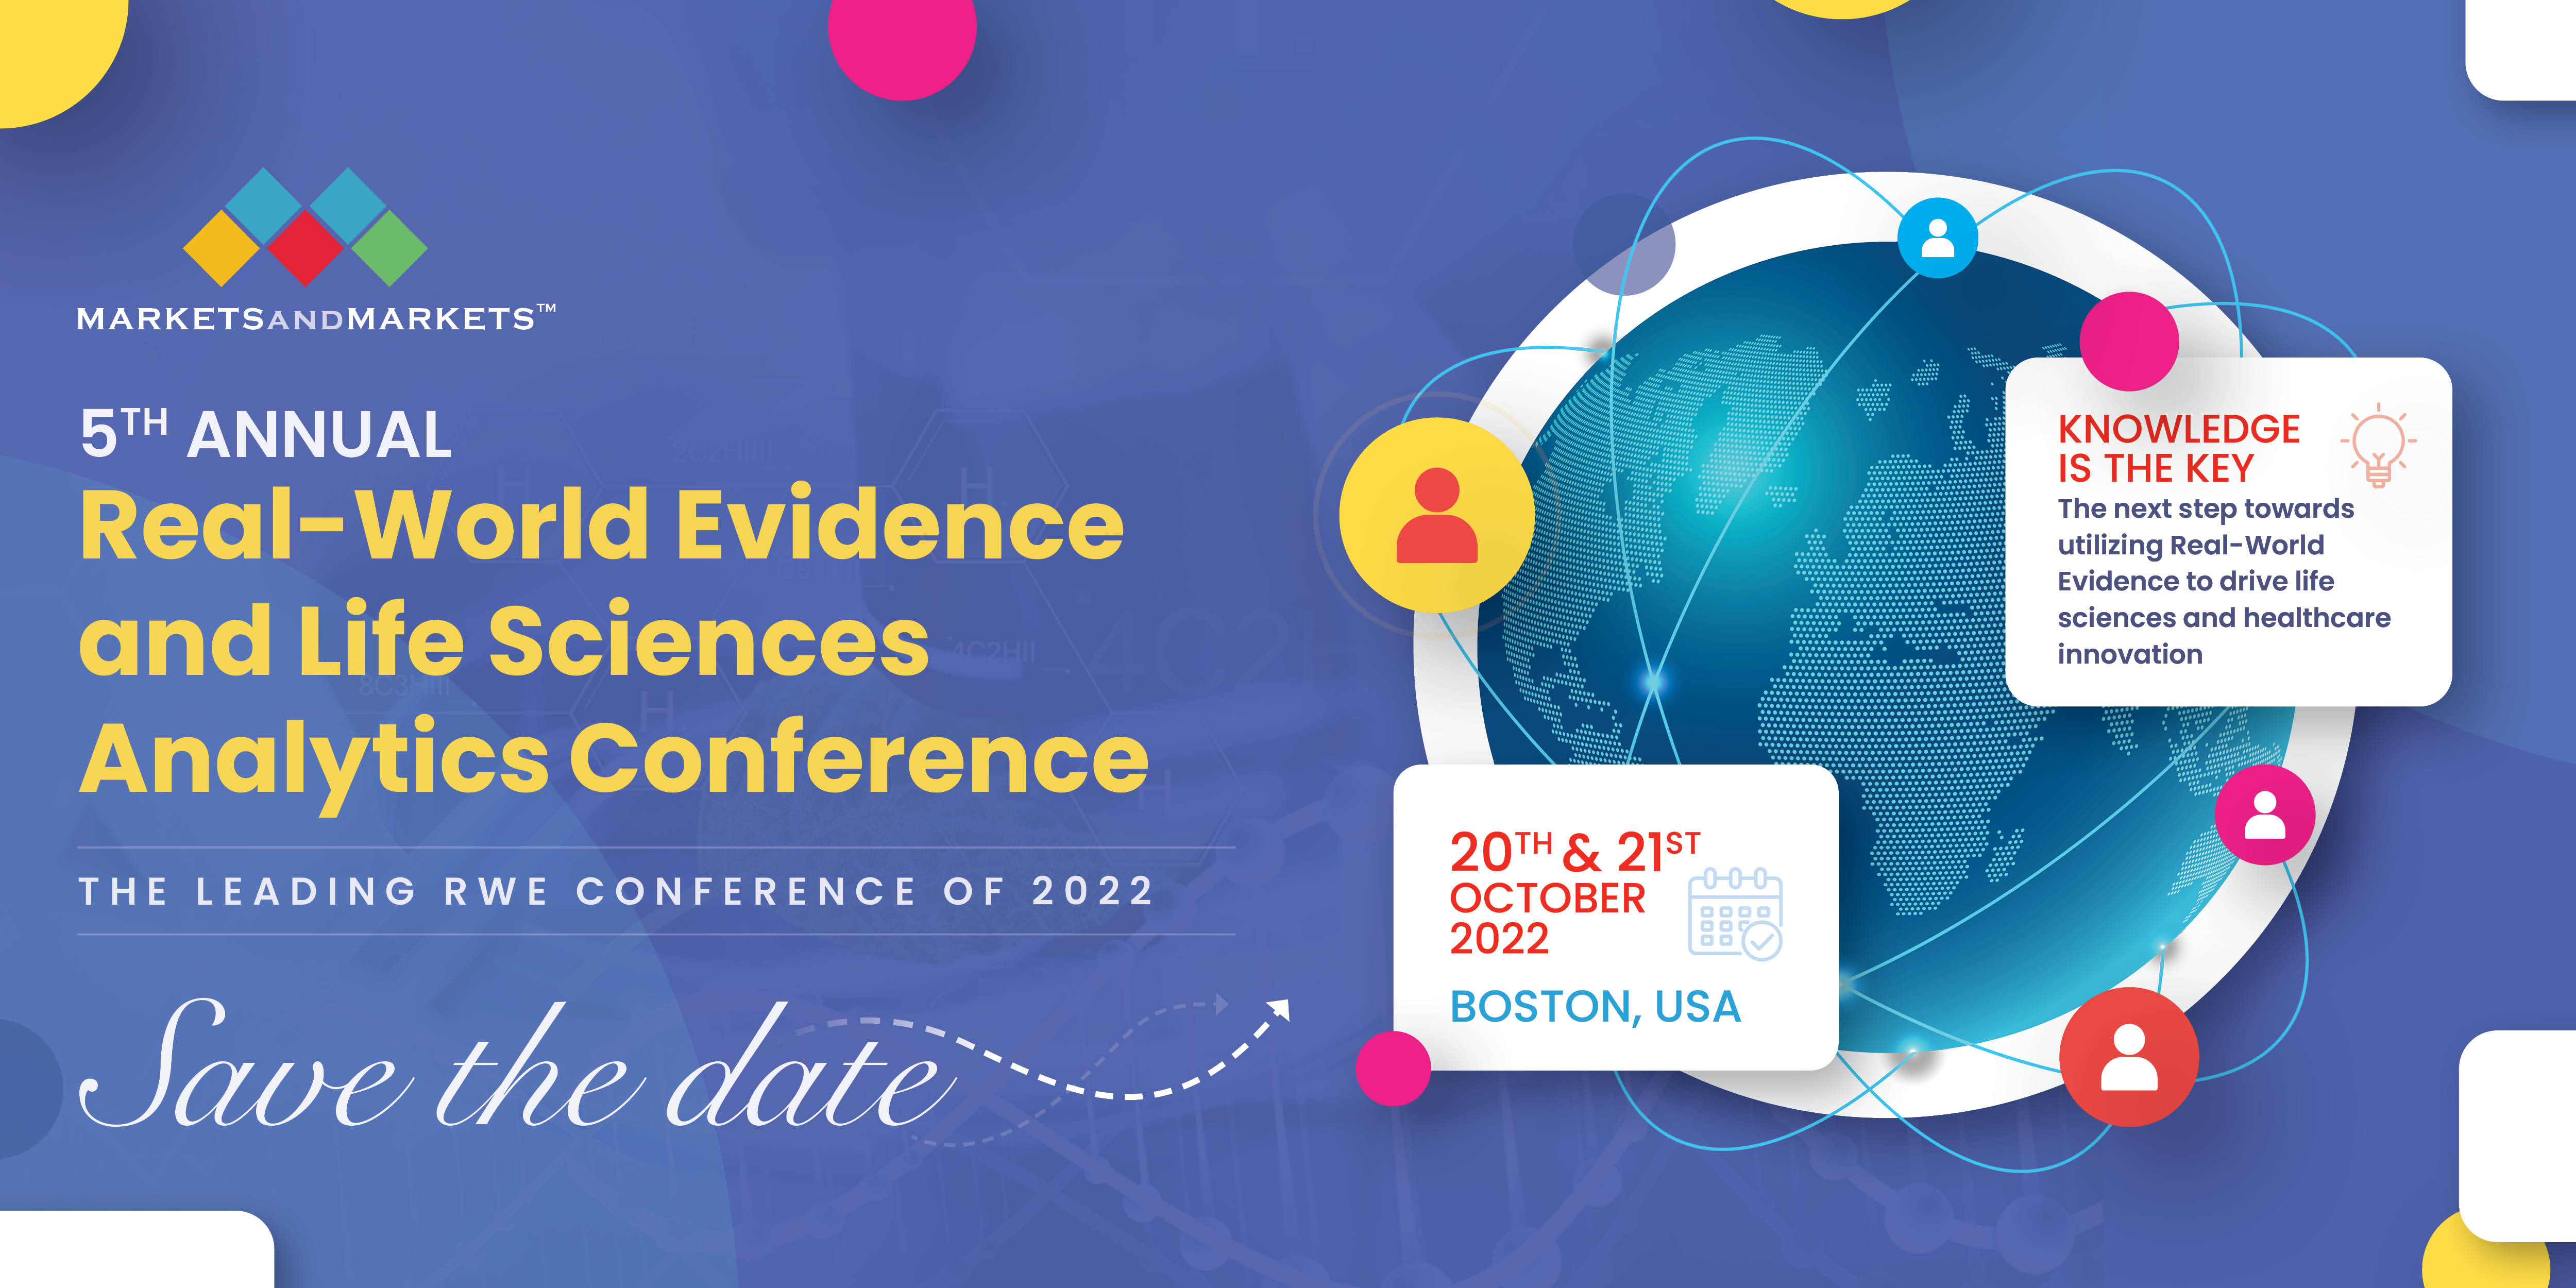 5th Annual MarketsandMarkets Real-World Evidence and Life Sciences Analytics Conference- Boston, Boston, United States